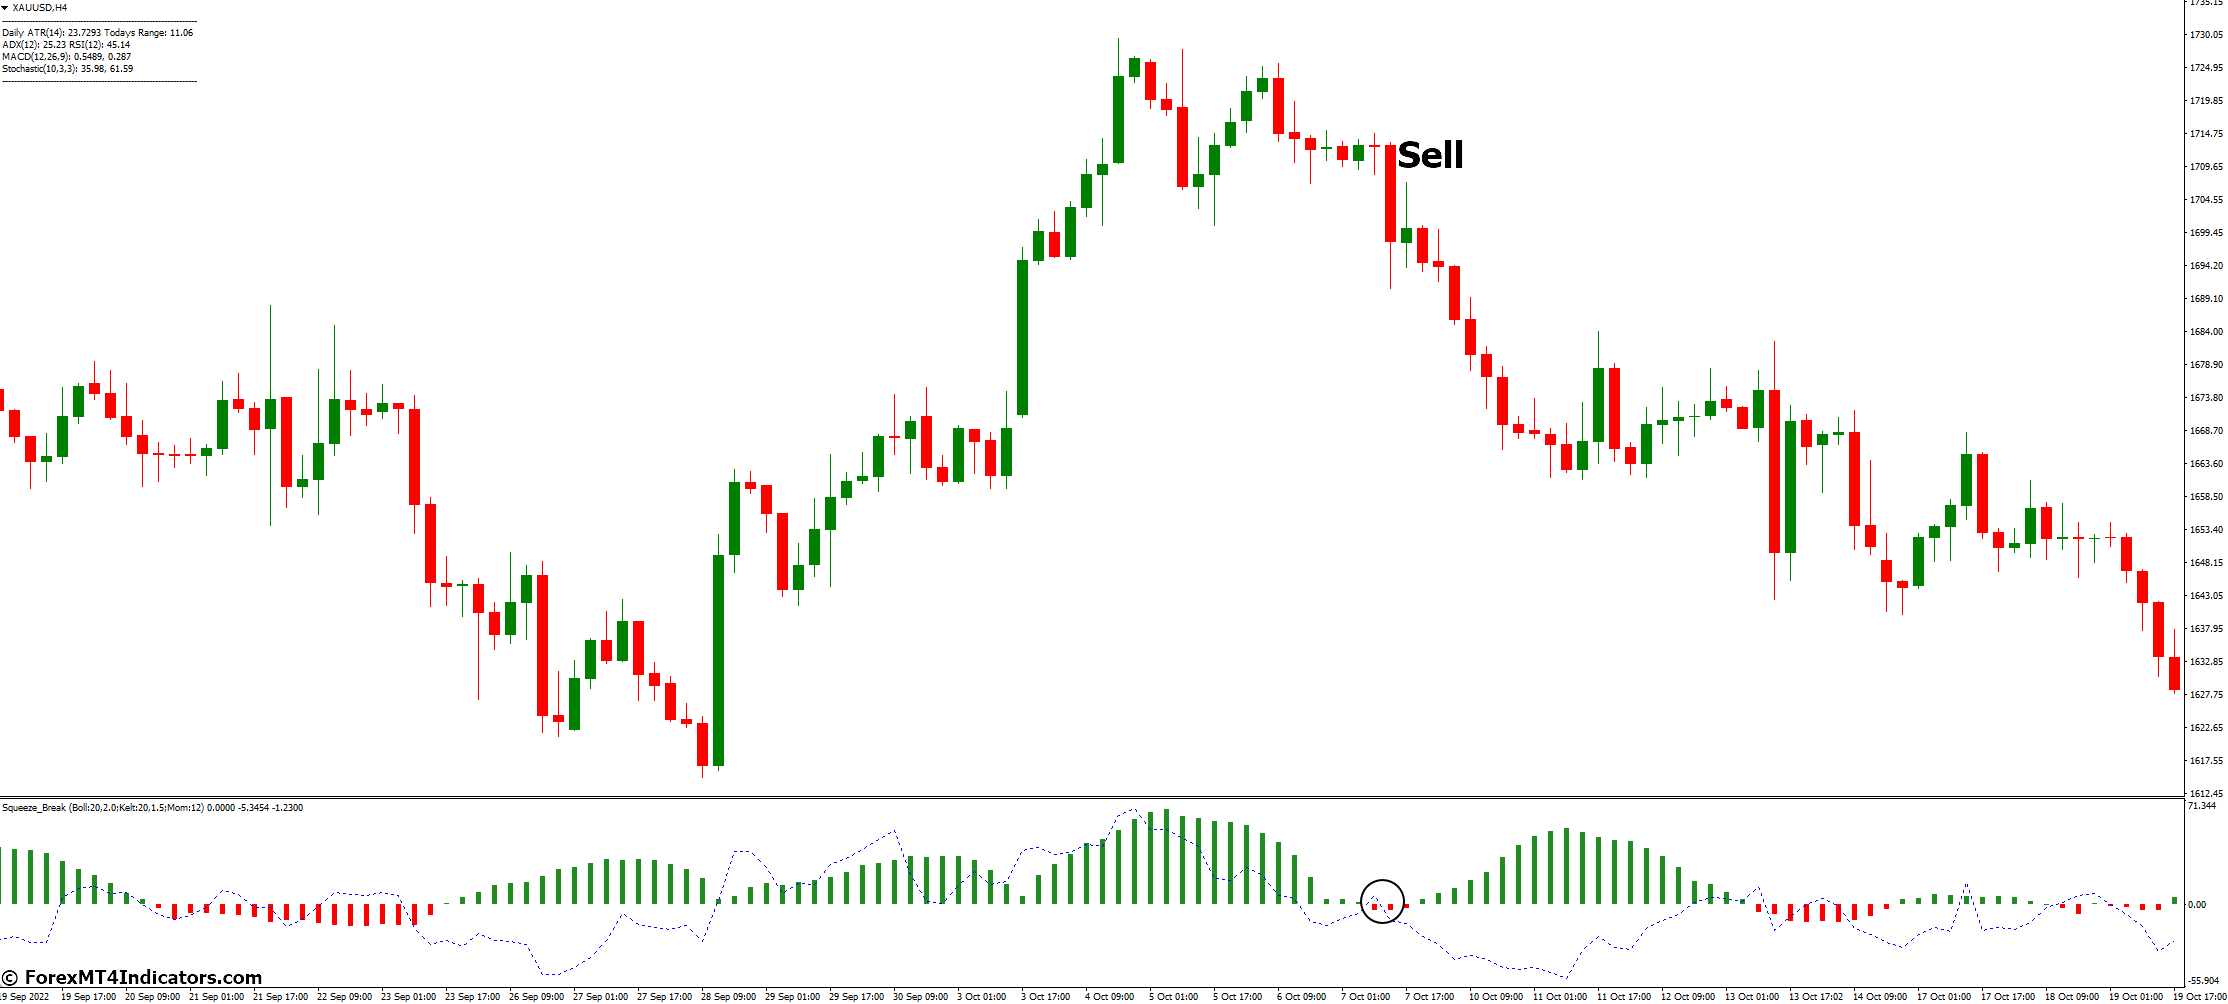 How to Trade with Squeeze Break MT4 Indicator - Sell Entry